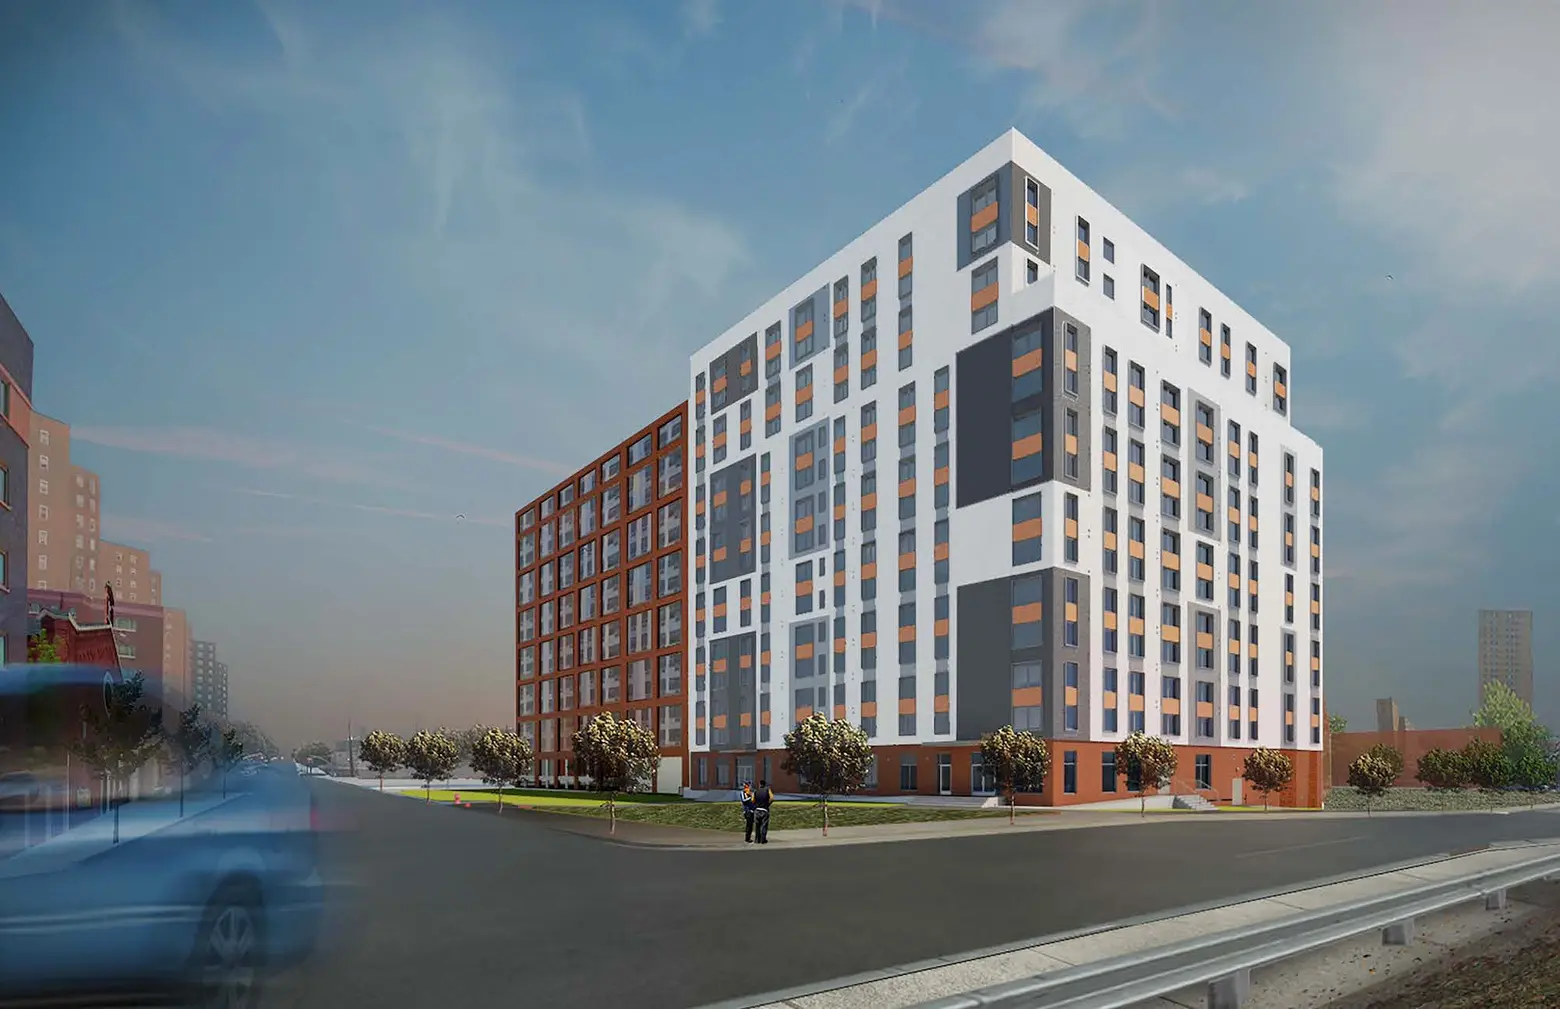 100+ affordable apartments up for grabs at a South Bronx passive house, from $702/month